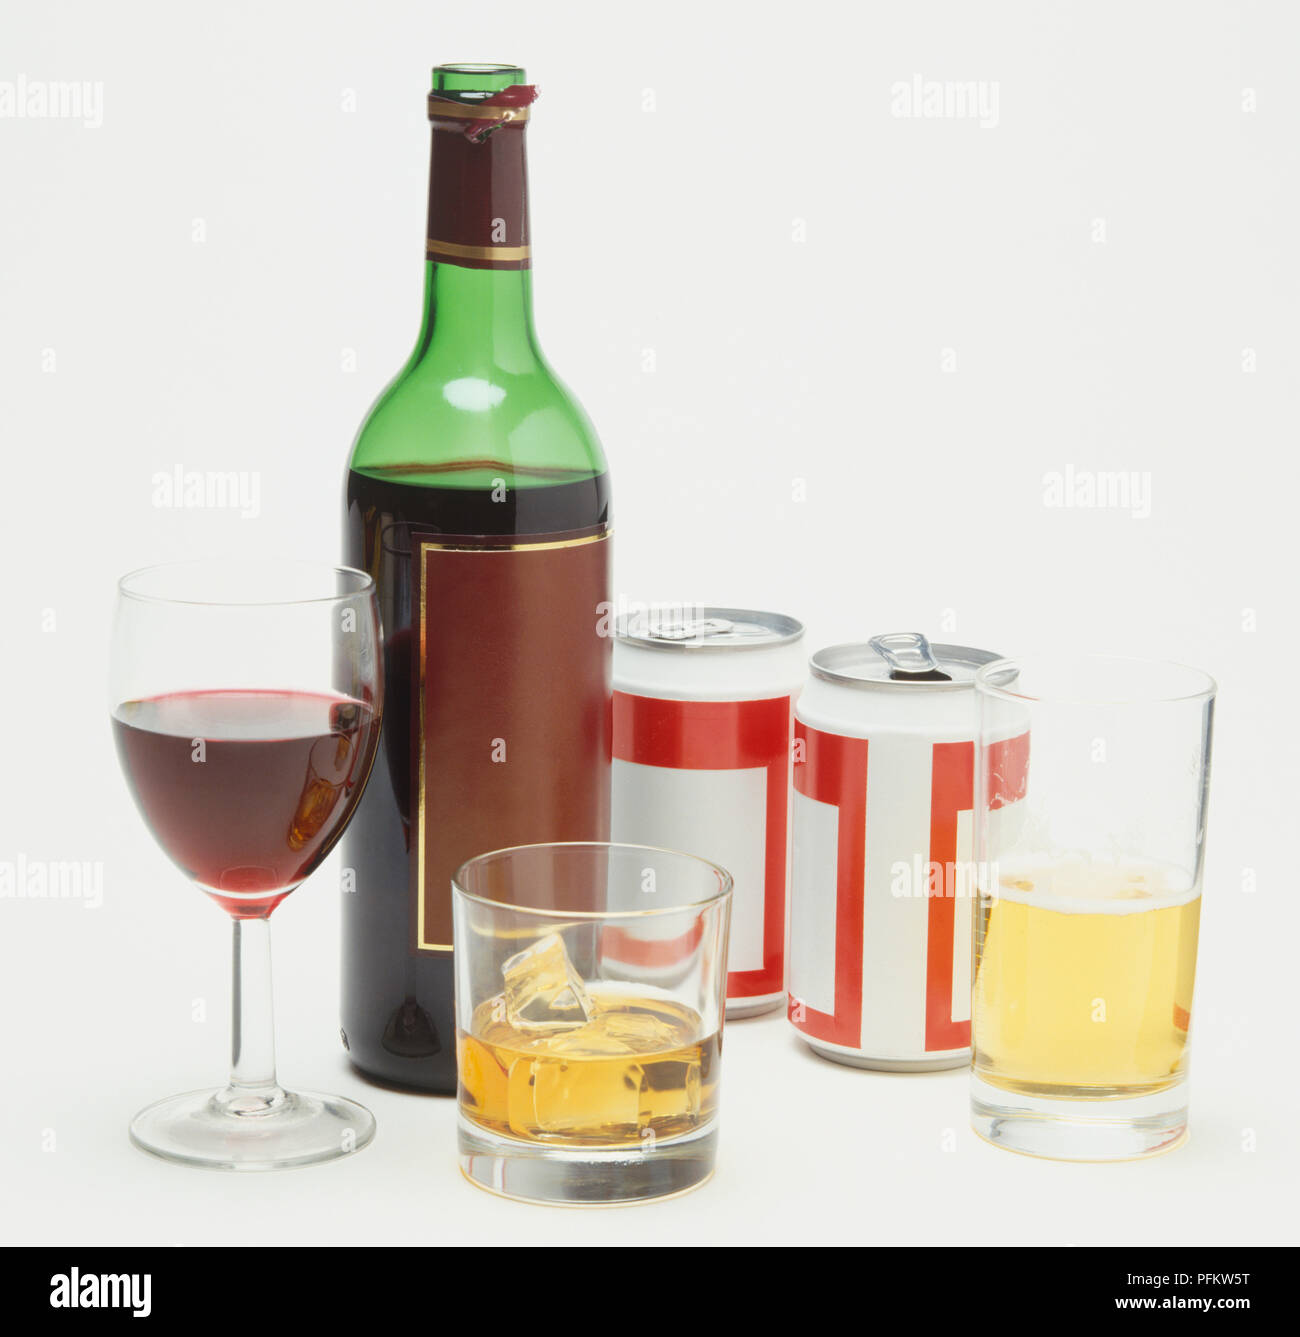 Selection of alcoholic drinks including bottle and glass of red wine, two tins of beer and glass half filled with beer, whisky glass containing ice cubes. Stock Photo